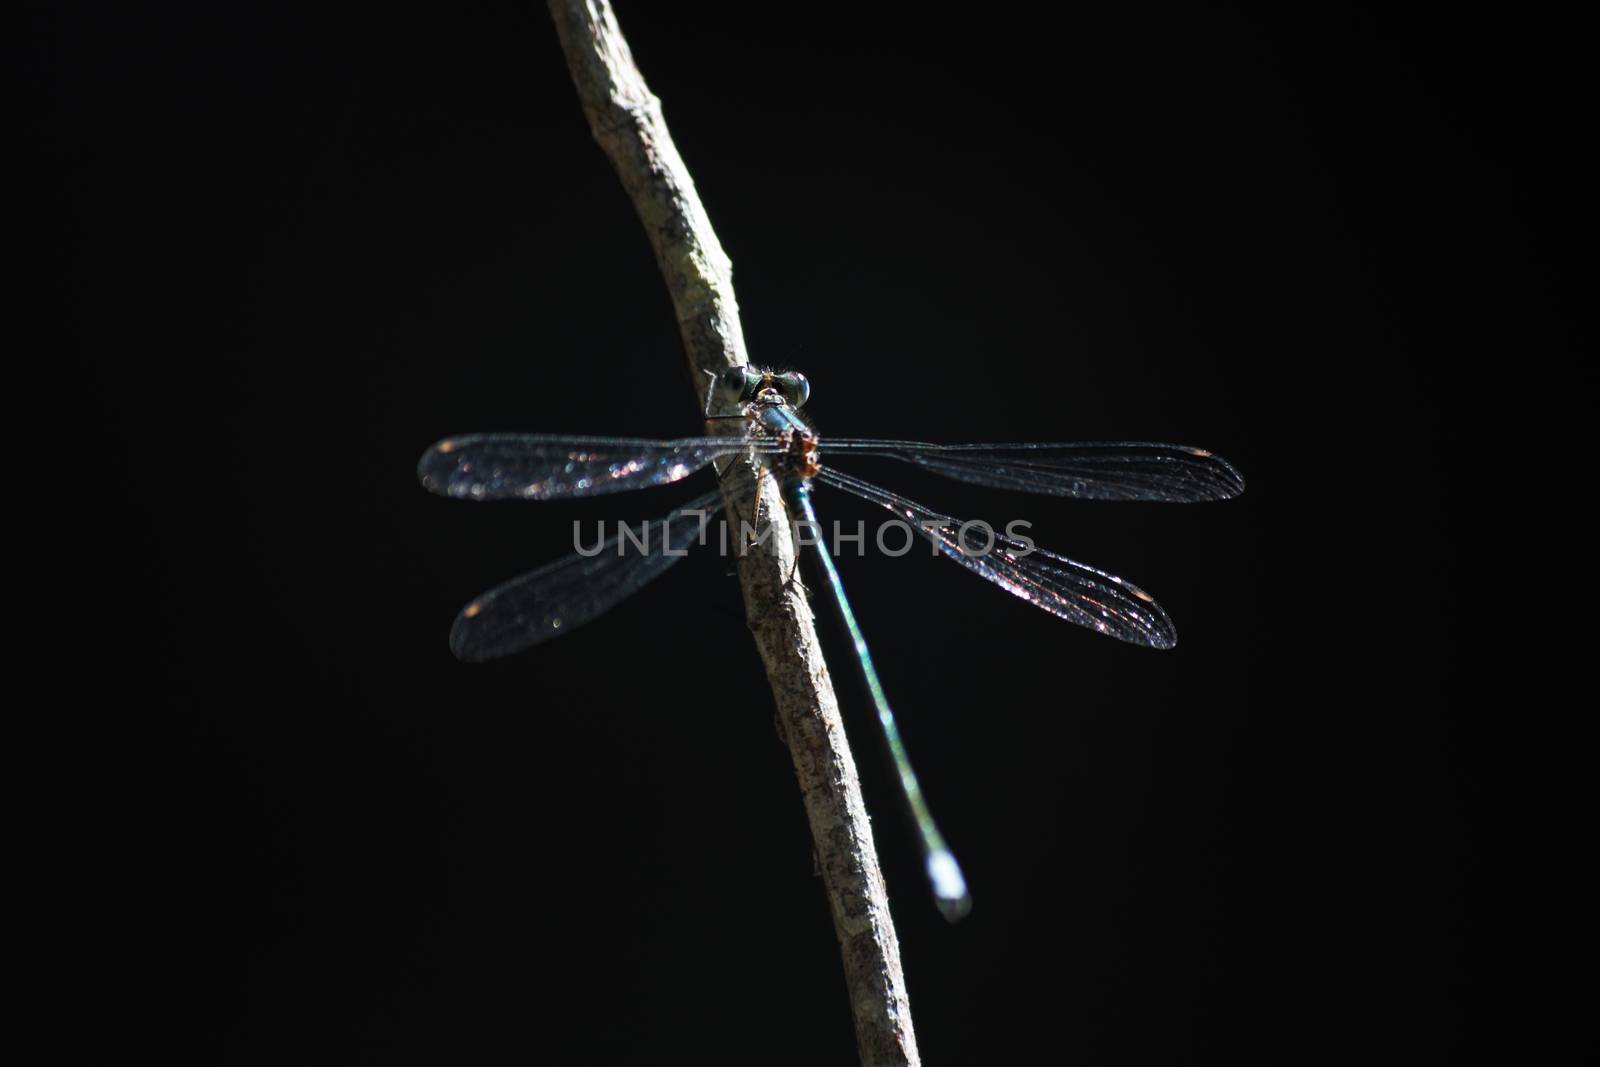 A pallid spreadwing damselfly (Lestes pallidus) in its blue form sitting on a twig in dark forest, Limpopo, South Africa